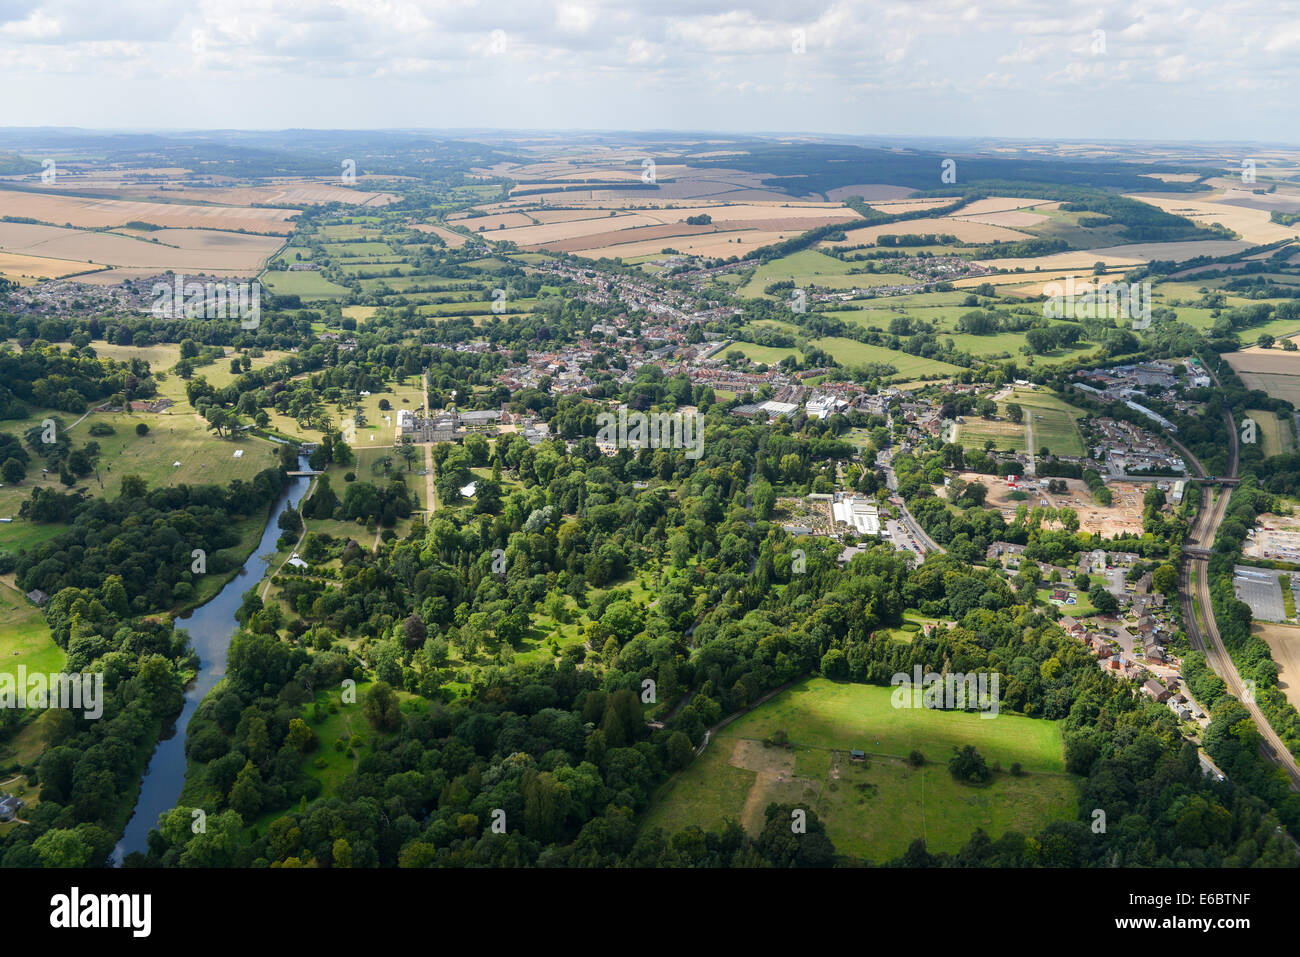 An aerial view of the town of Wilton in Wiltshire showing the River Nadder and Wilton House. Stock Photo